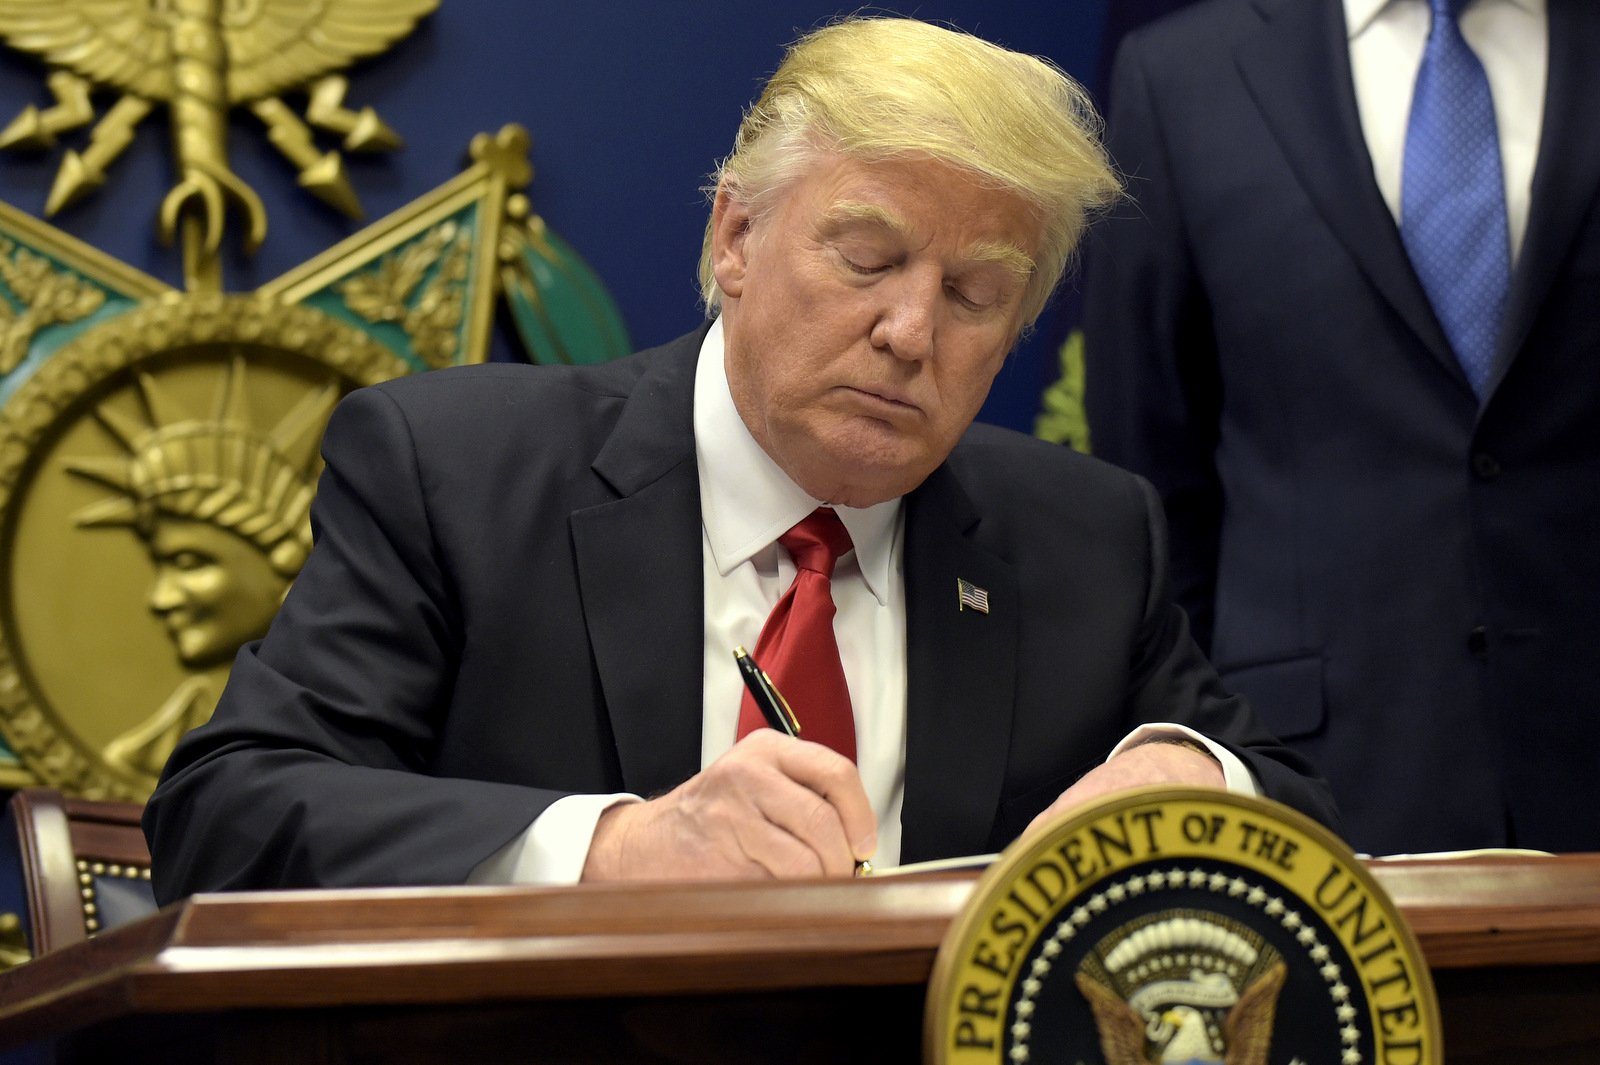 President Donald Trump signs an executive order on 'extreme vetting' during an event at the Pentagon in Washington, Friday, Jan. 27, 2017. (AP/Susan Walsh)